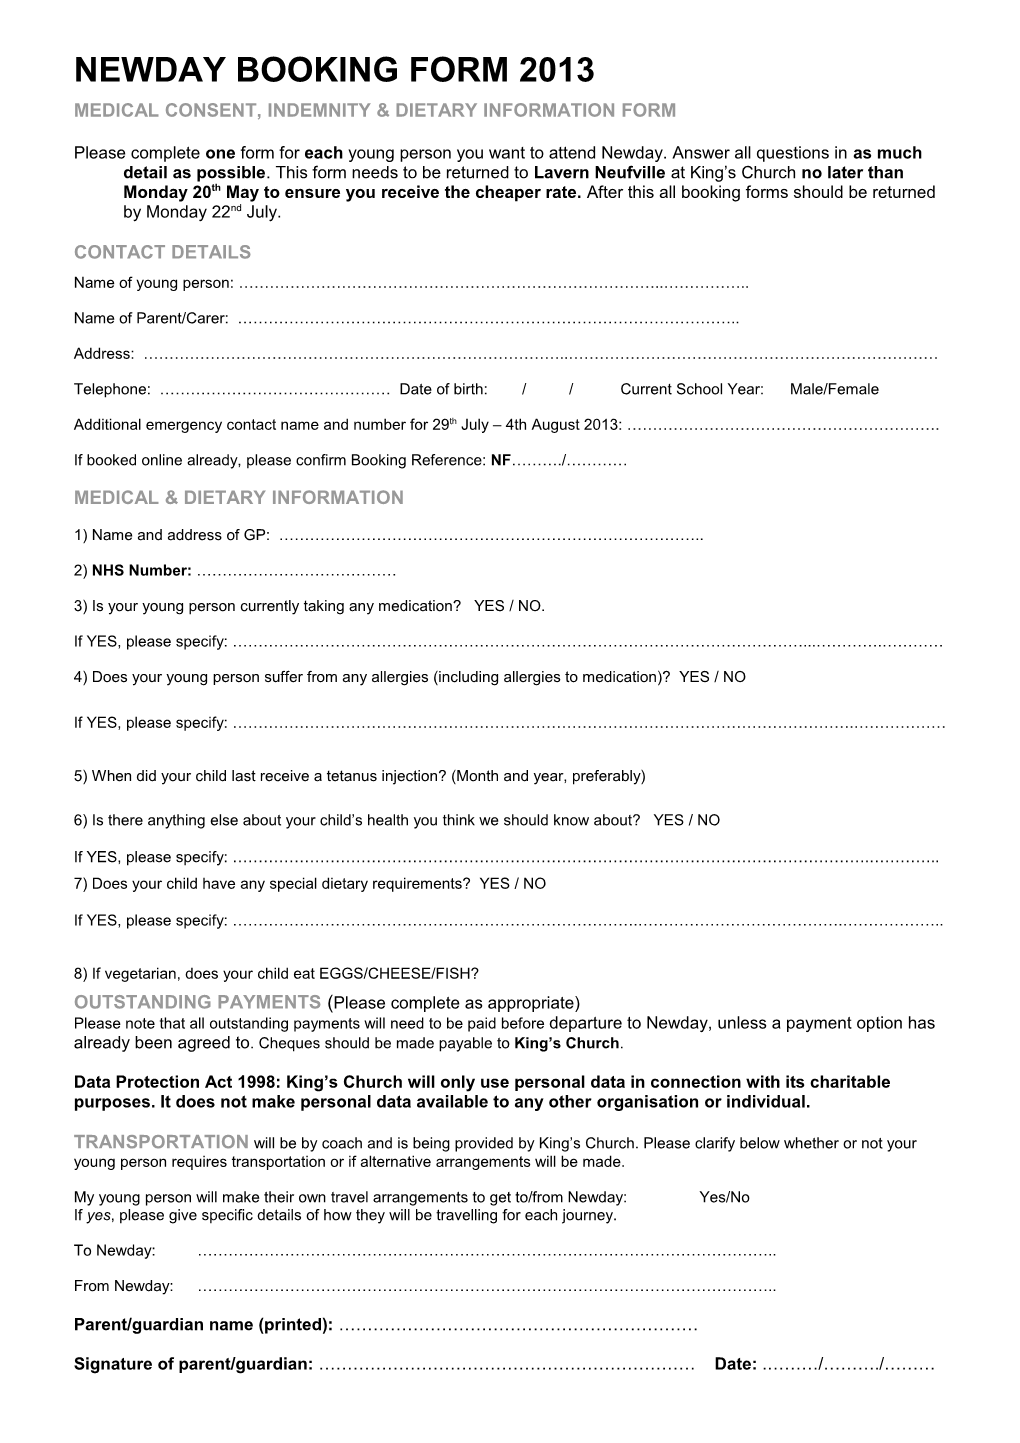 Medical Consent, Indemnity & Dietary Information Form